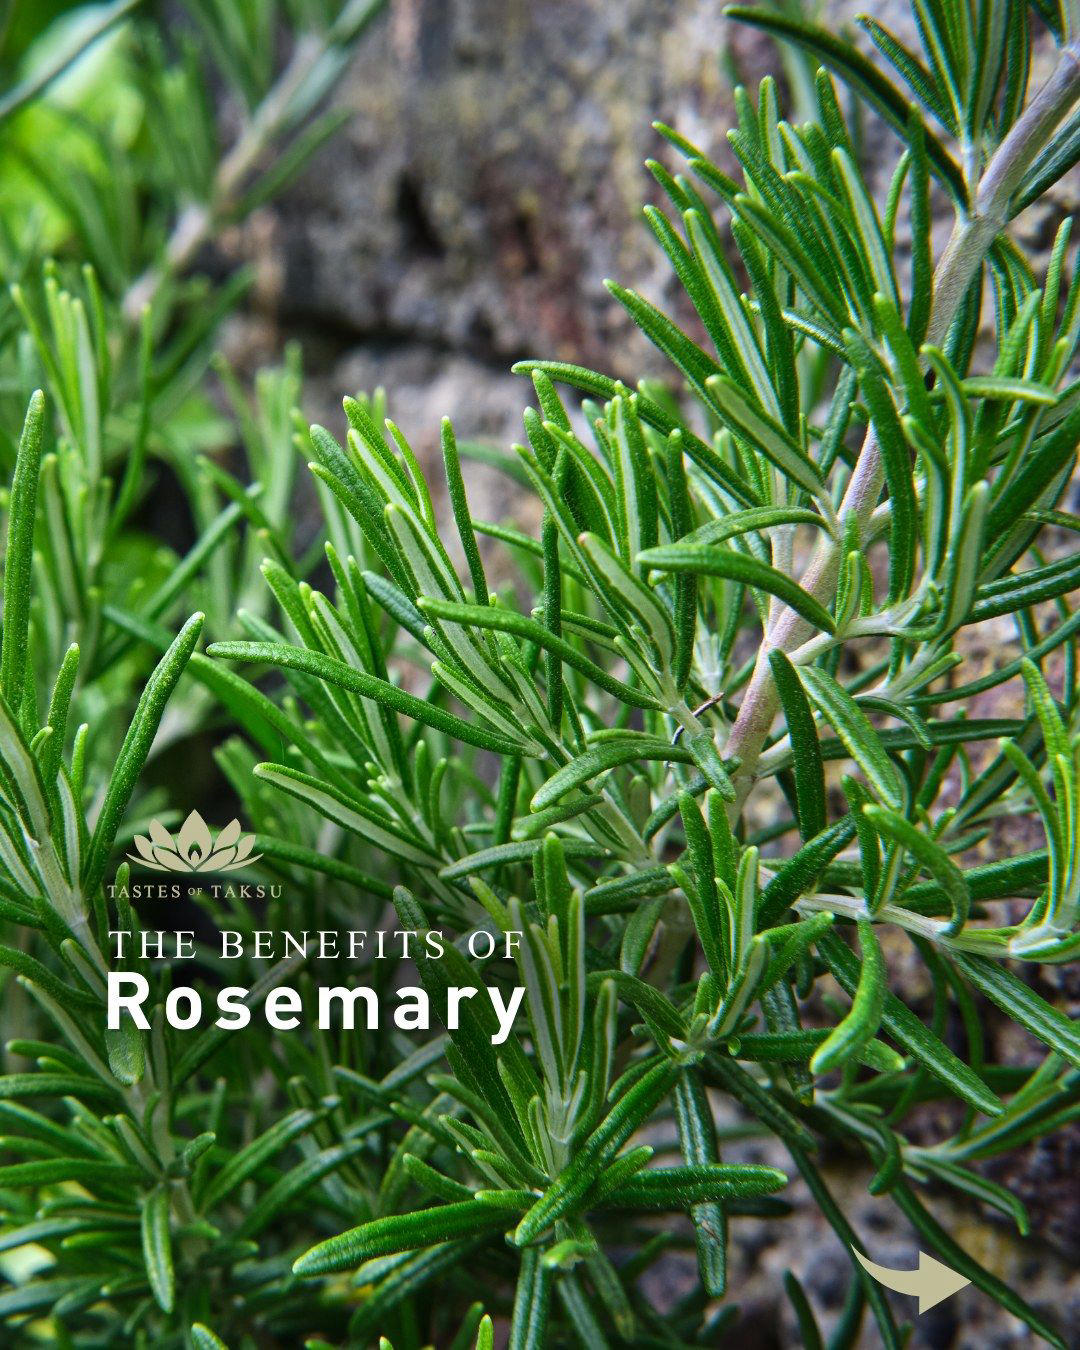 Did you know that Rosemary is more than just a delicious herb for cooking